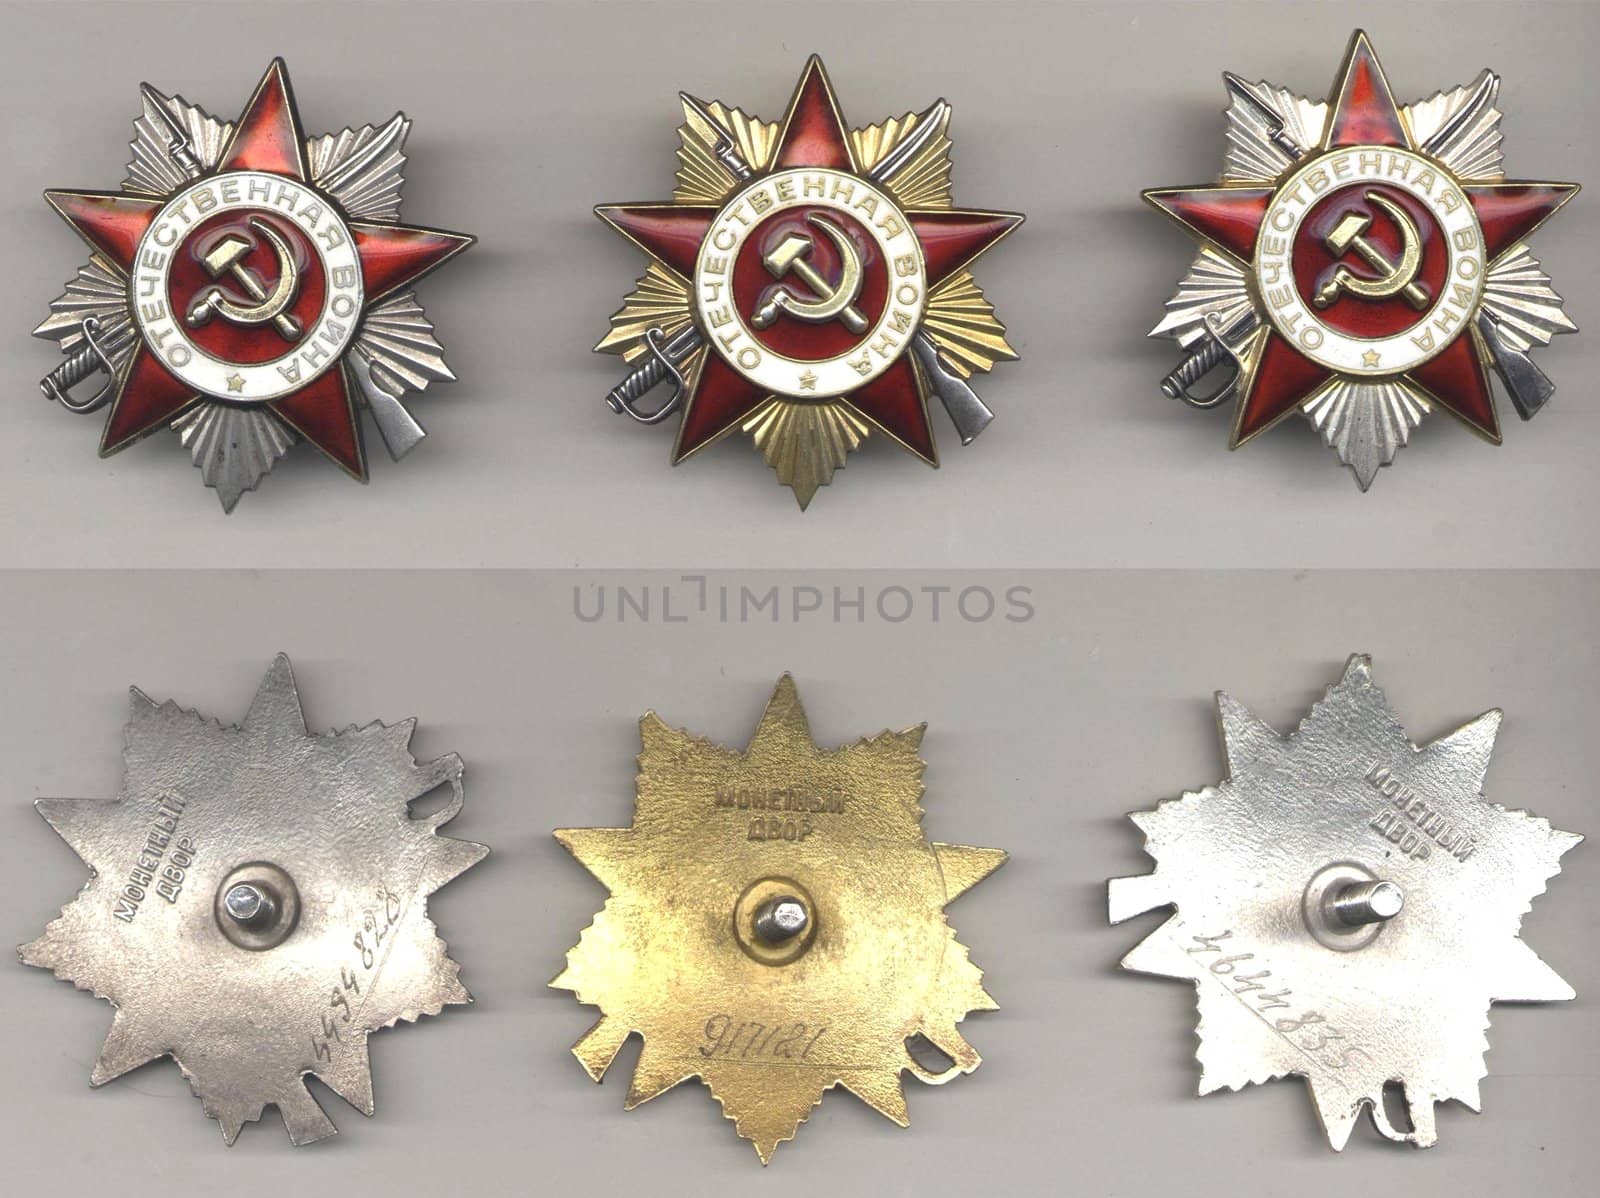 These are some very rare soviet orders. They were presented during Great Patriotic War (1941-1945) and after it. 